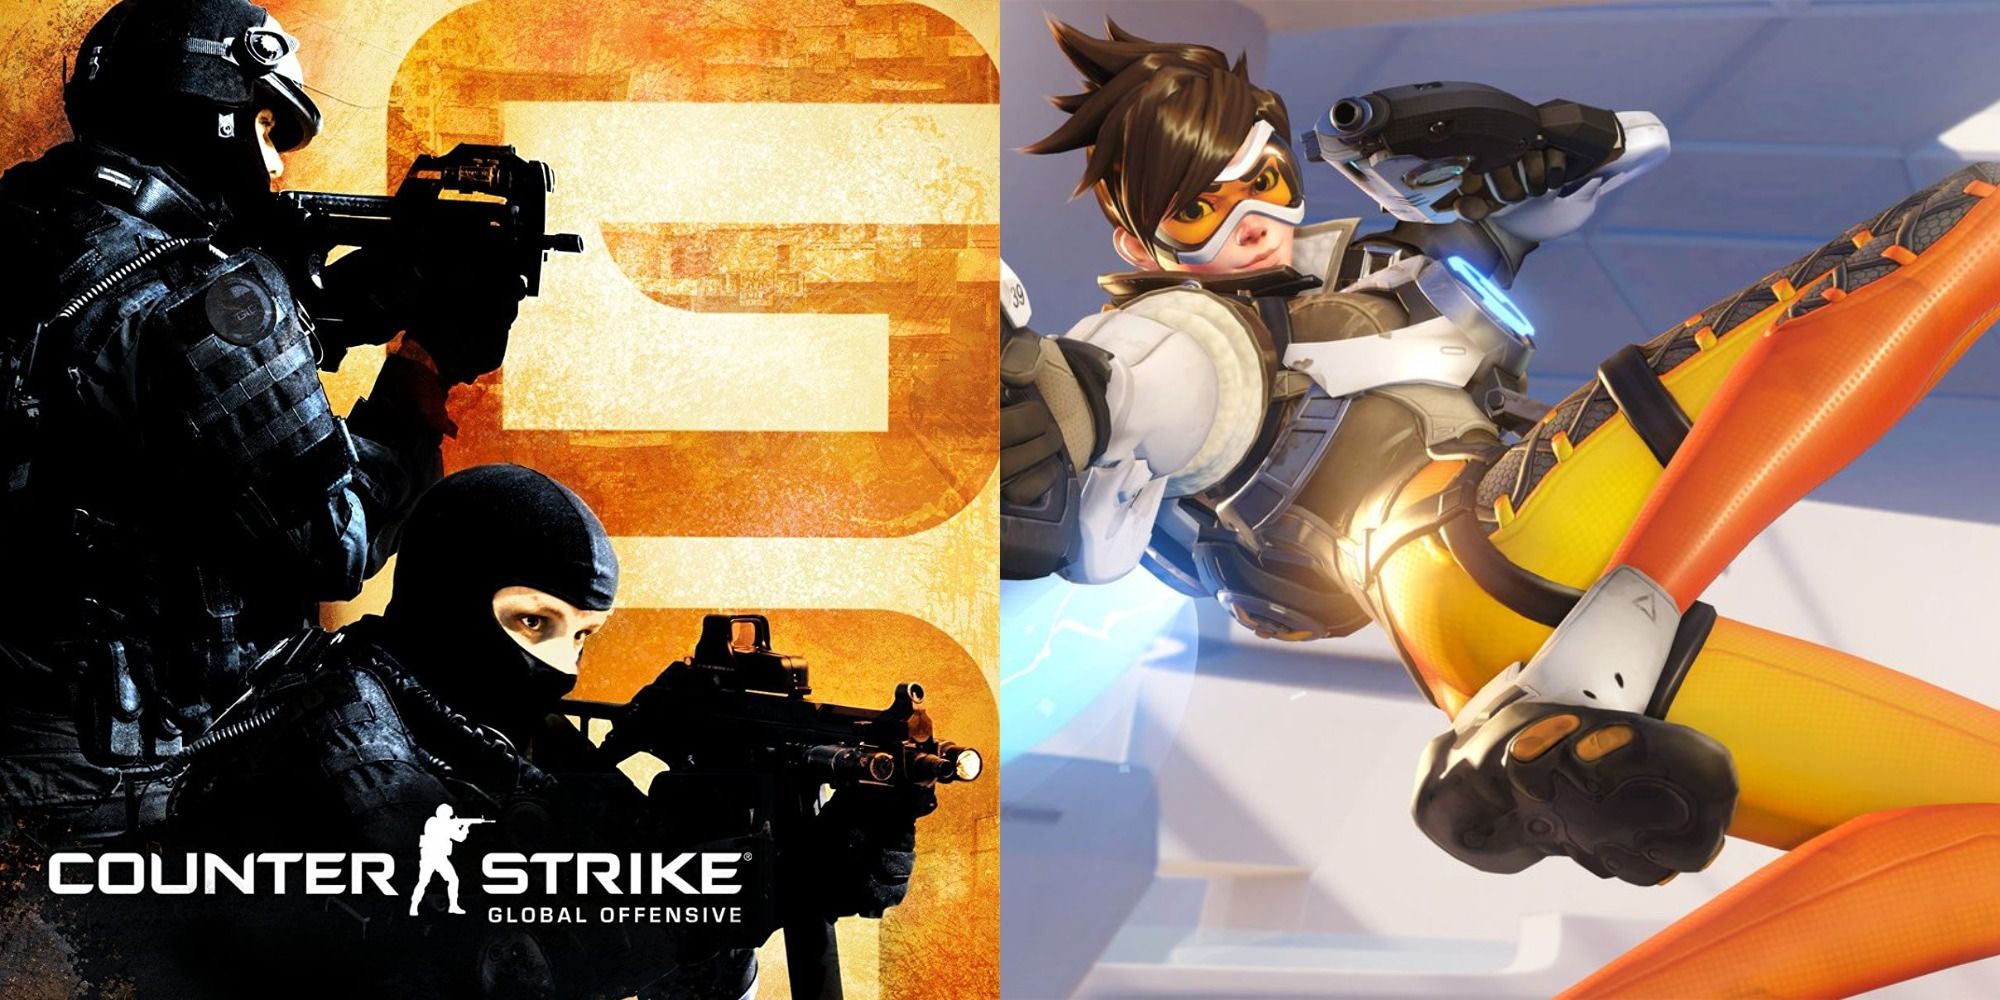 Split image of Counter Strike Global Offensive & a character kicking in the air in Overwatch.